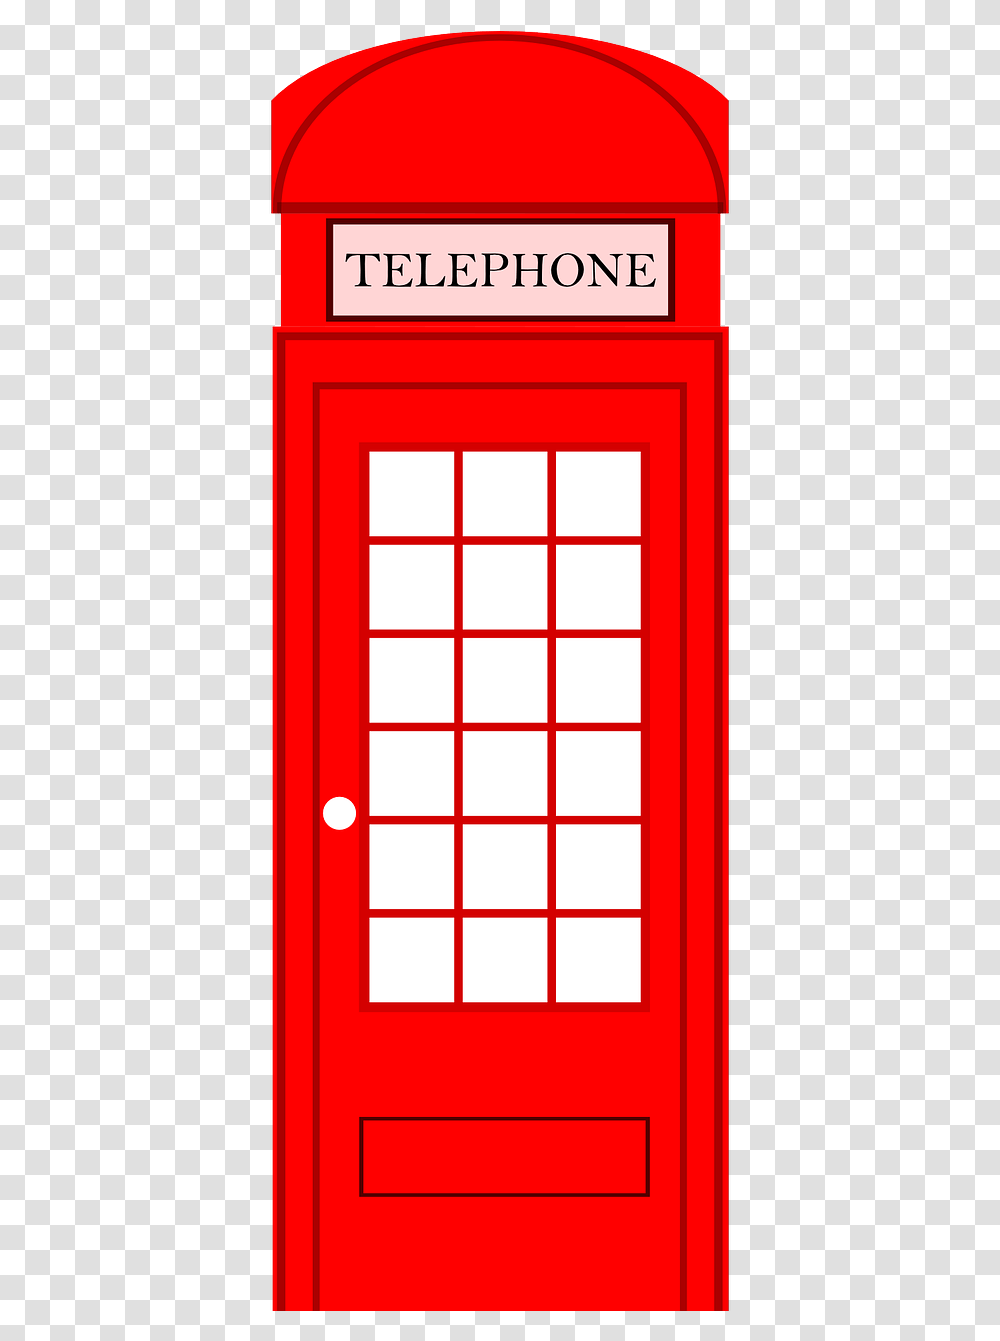 London Phone Booth Cartoon, Mailbox, Letterbox Transparent Png